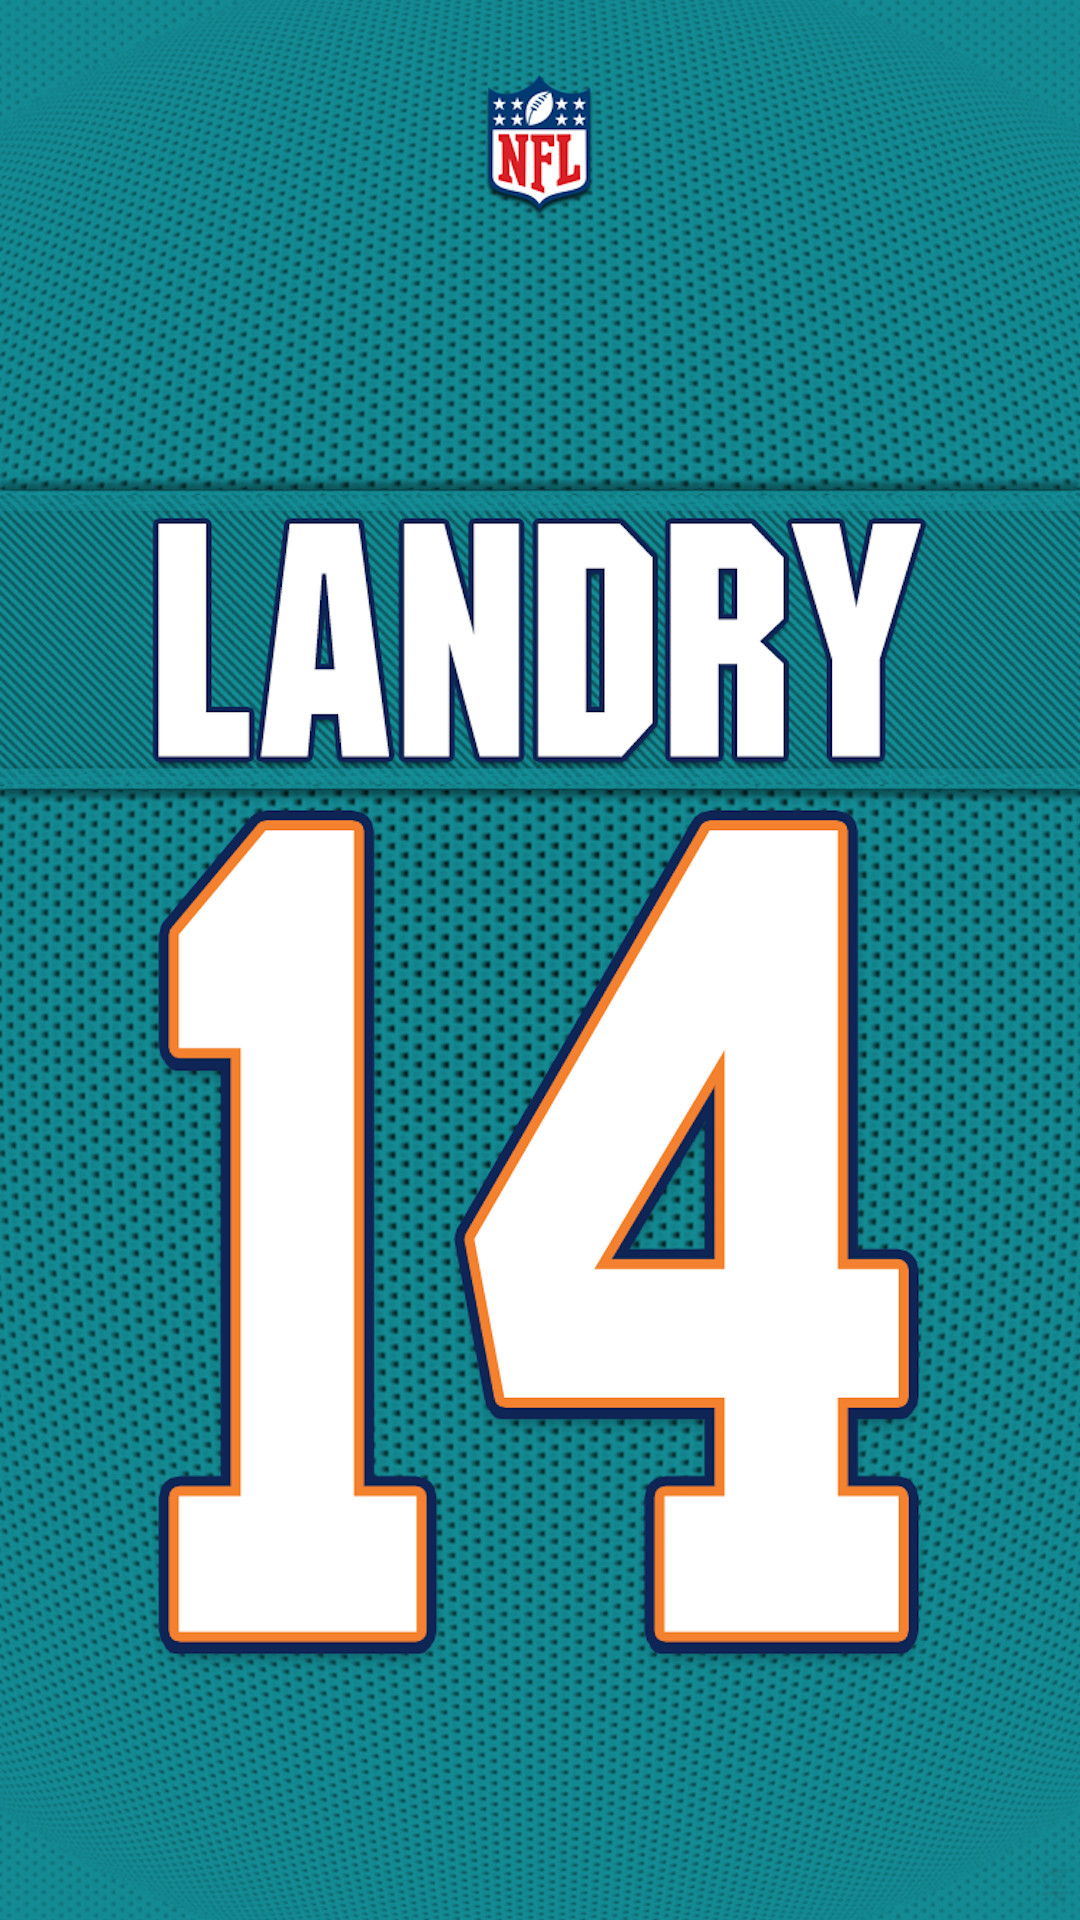 1080x1920 Miami Dolphins Landry.png